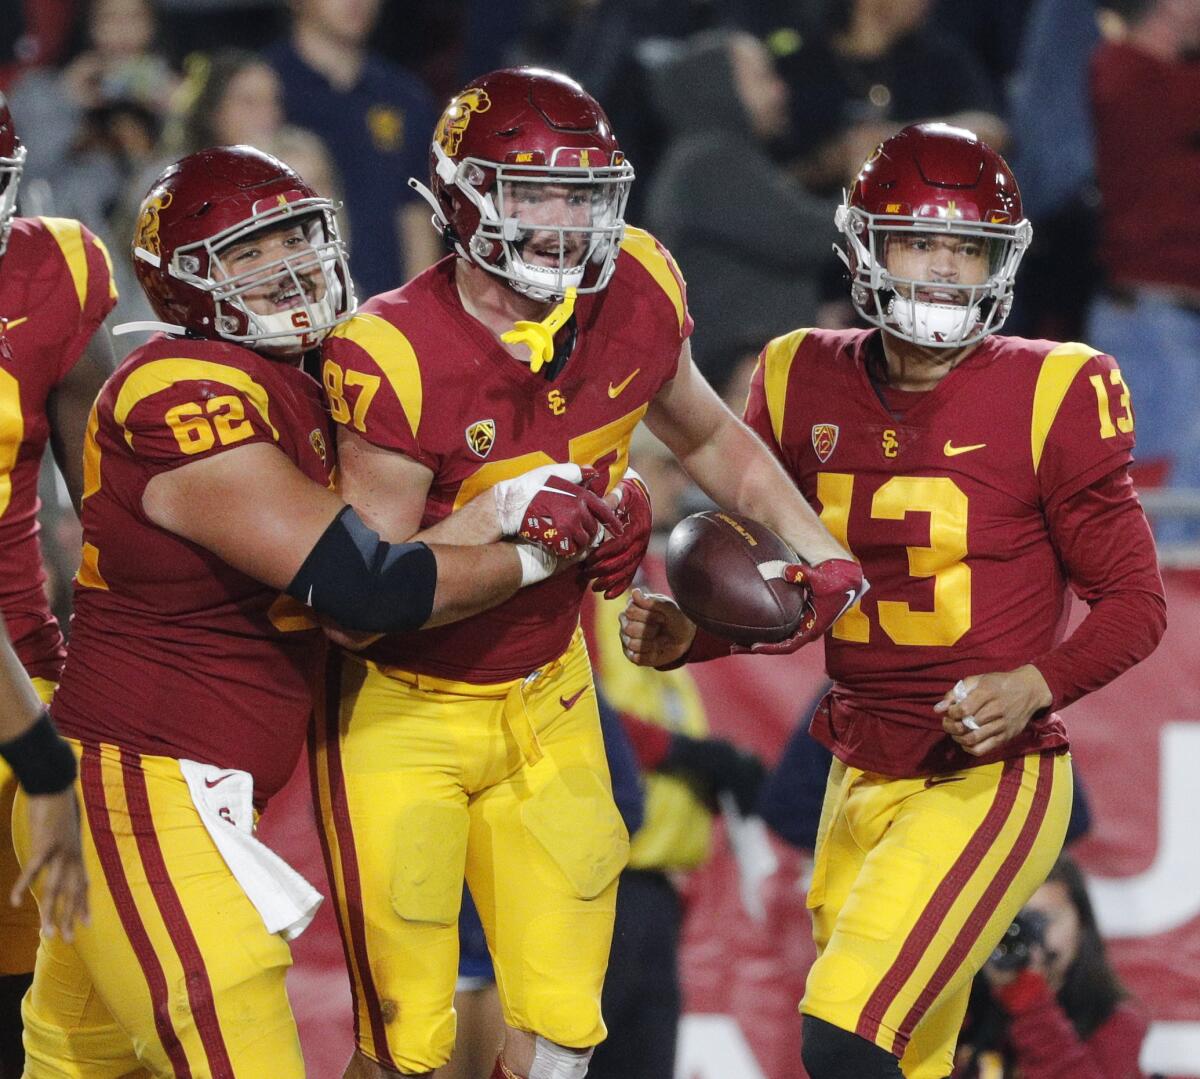 USC tight end Lake McRee is congratulated by lineman Brett Neilon and quarterback Caleb Williams after scoring a touchdown.